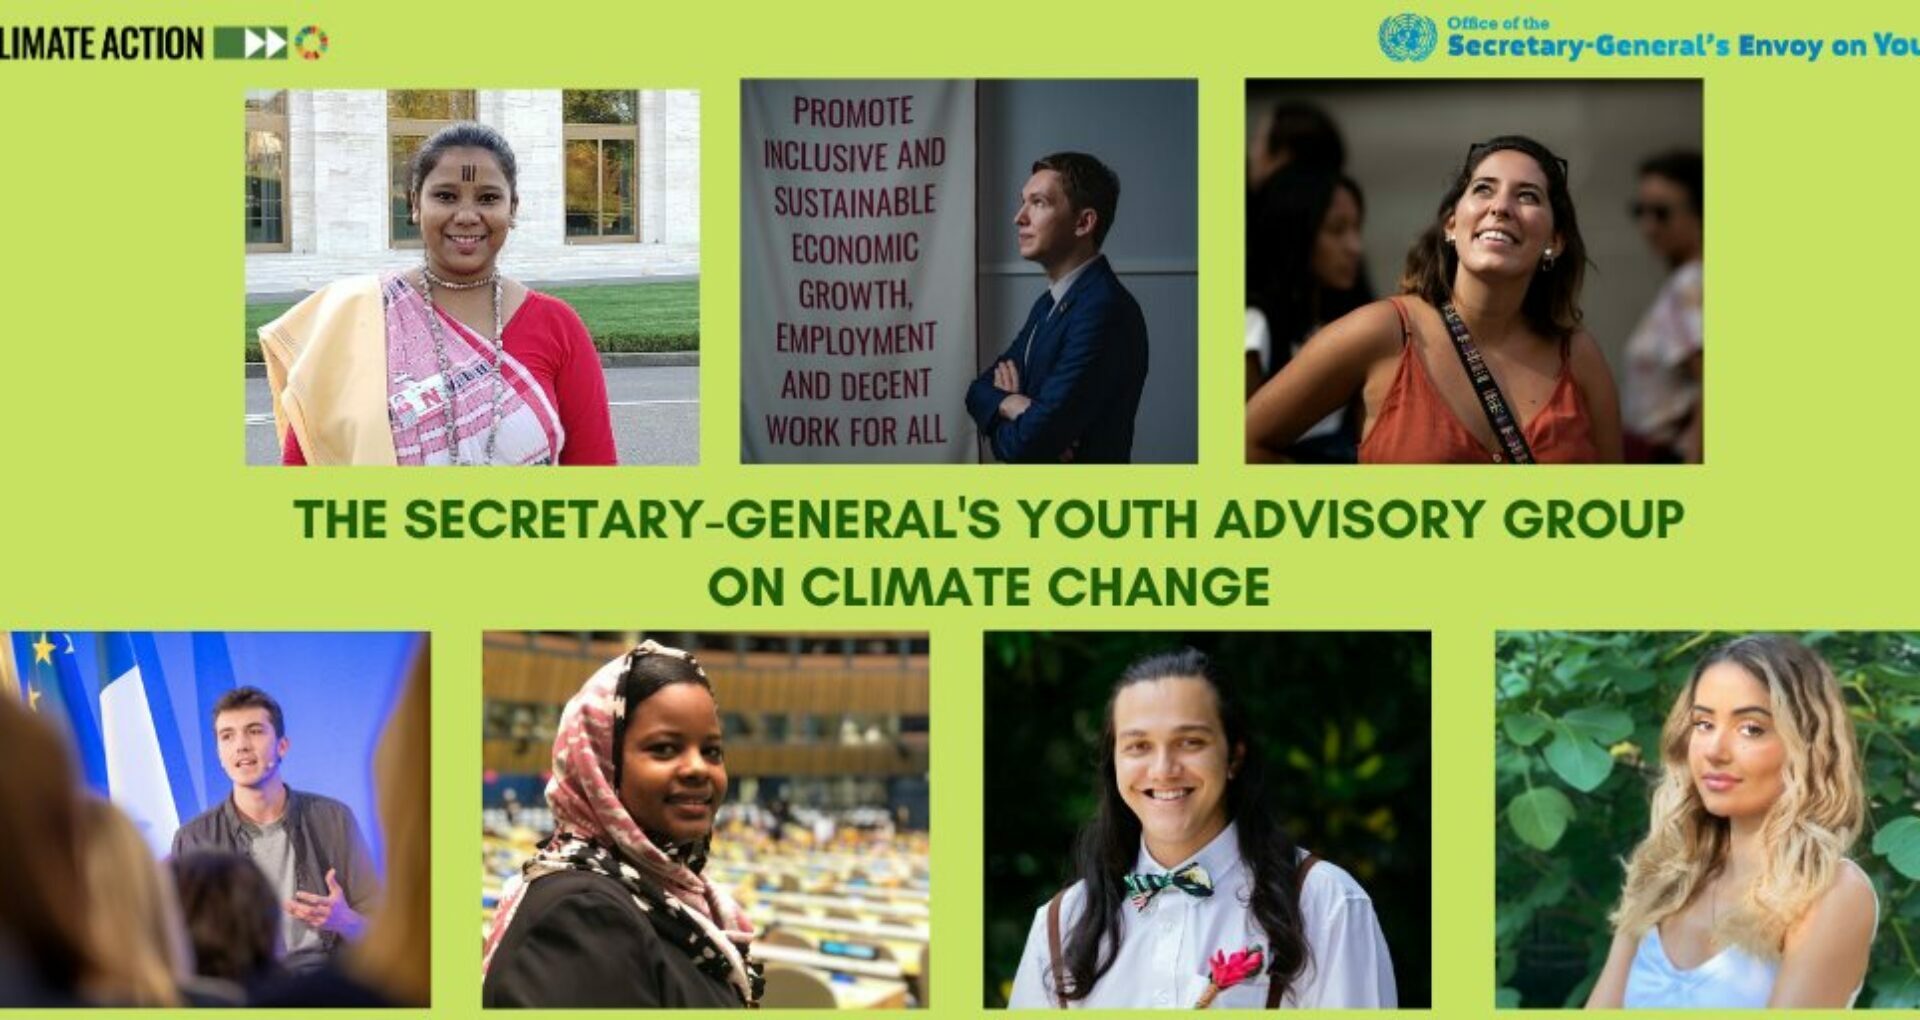 A Young Man from Moldova Became a Member of the Youth Advisory Group on Climate Change Launched by the U.N. Secretary-General